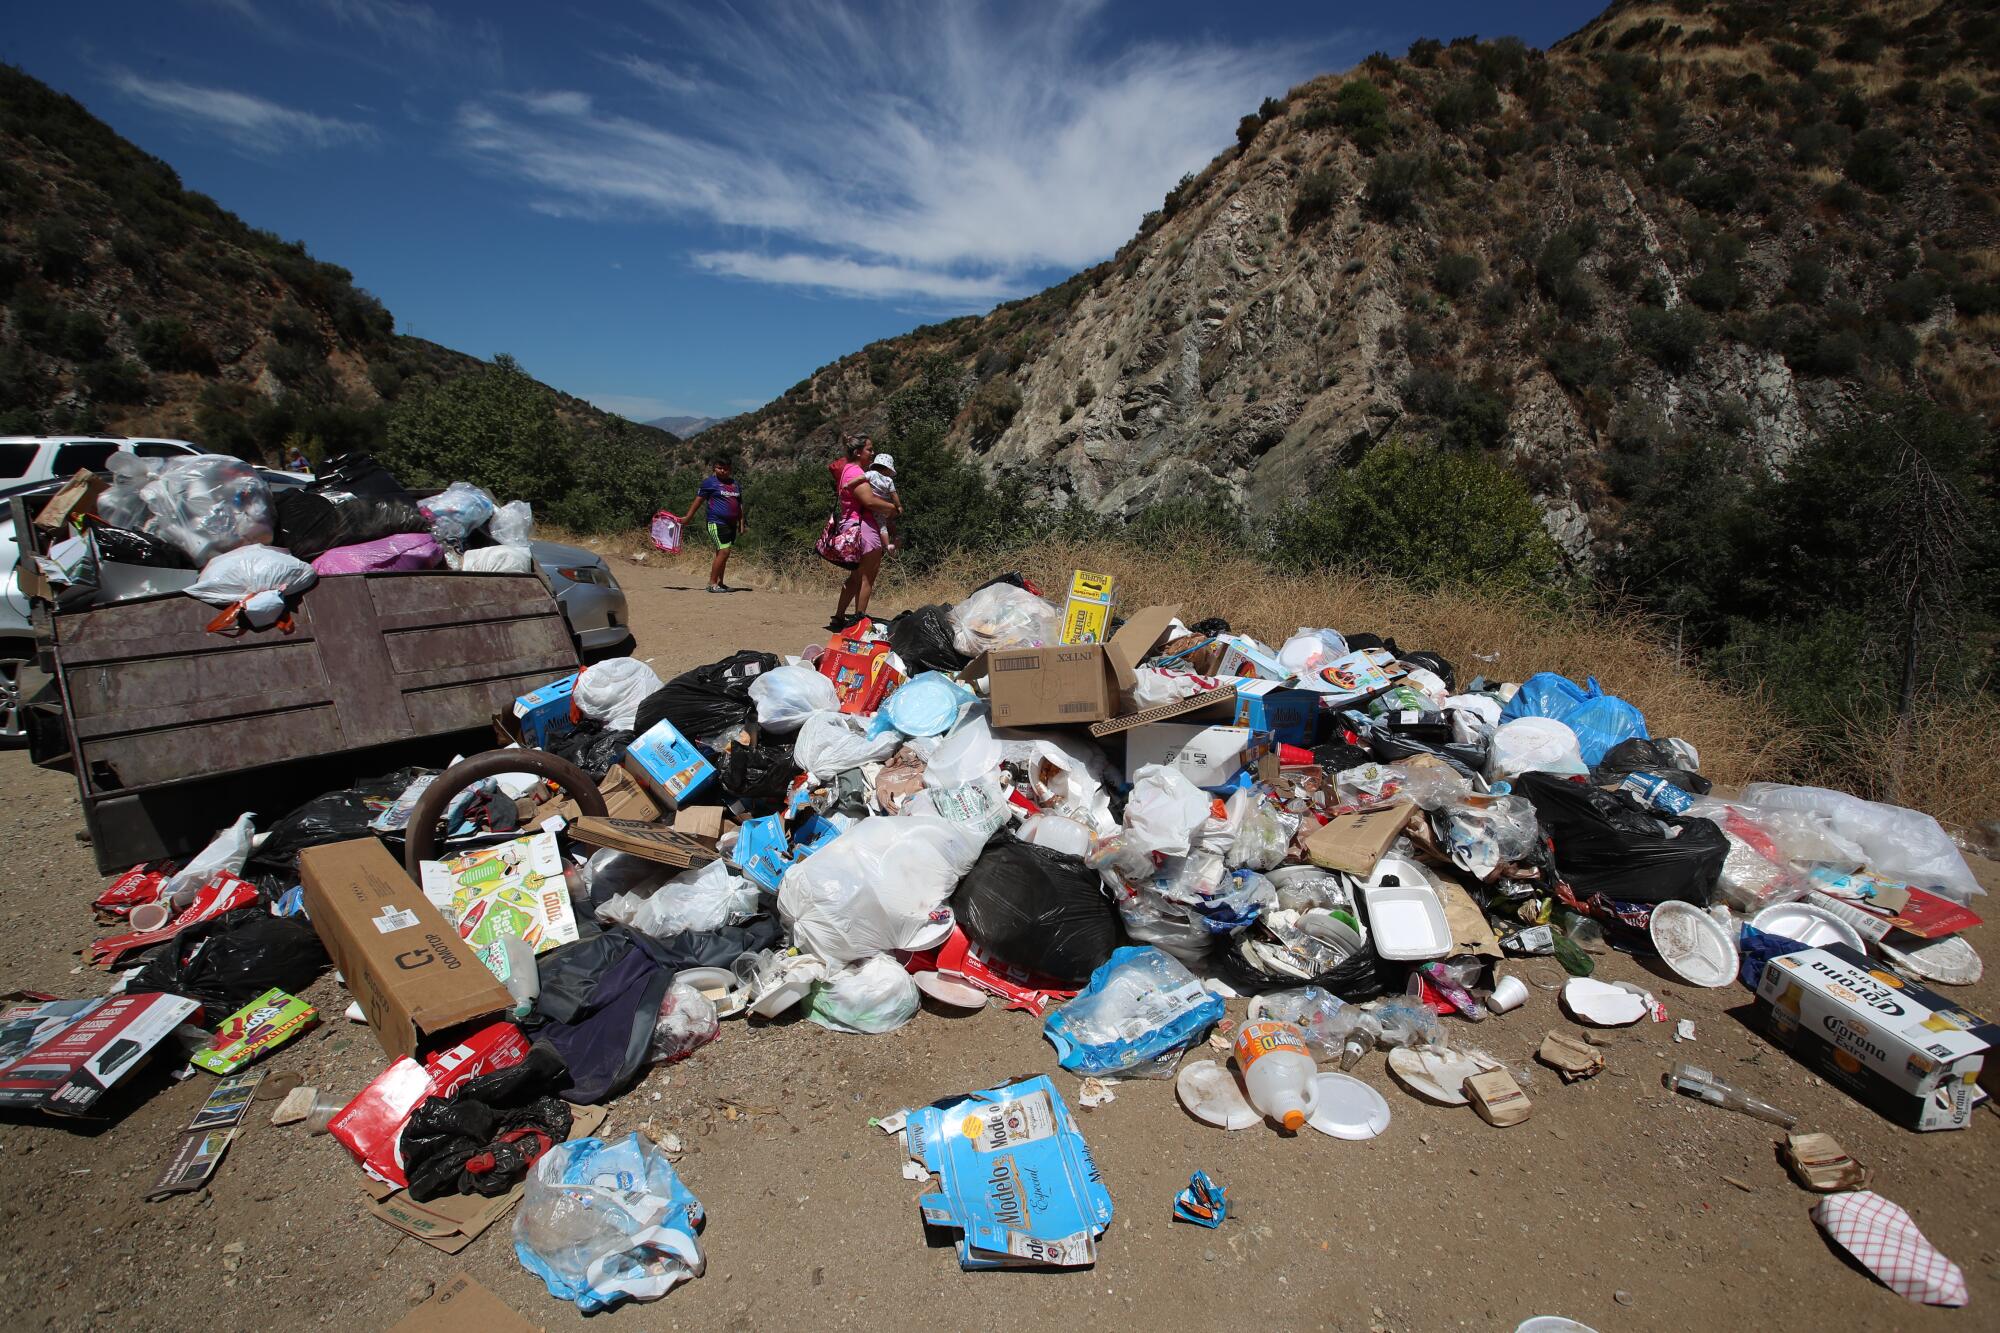 Heaps of trash are piled near a garbage bin as mountains rise in the background.